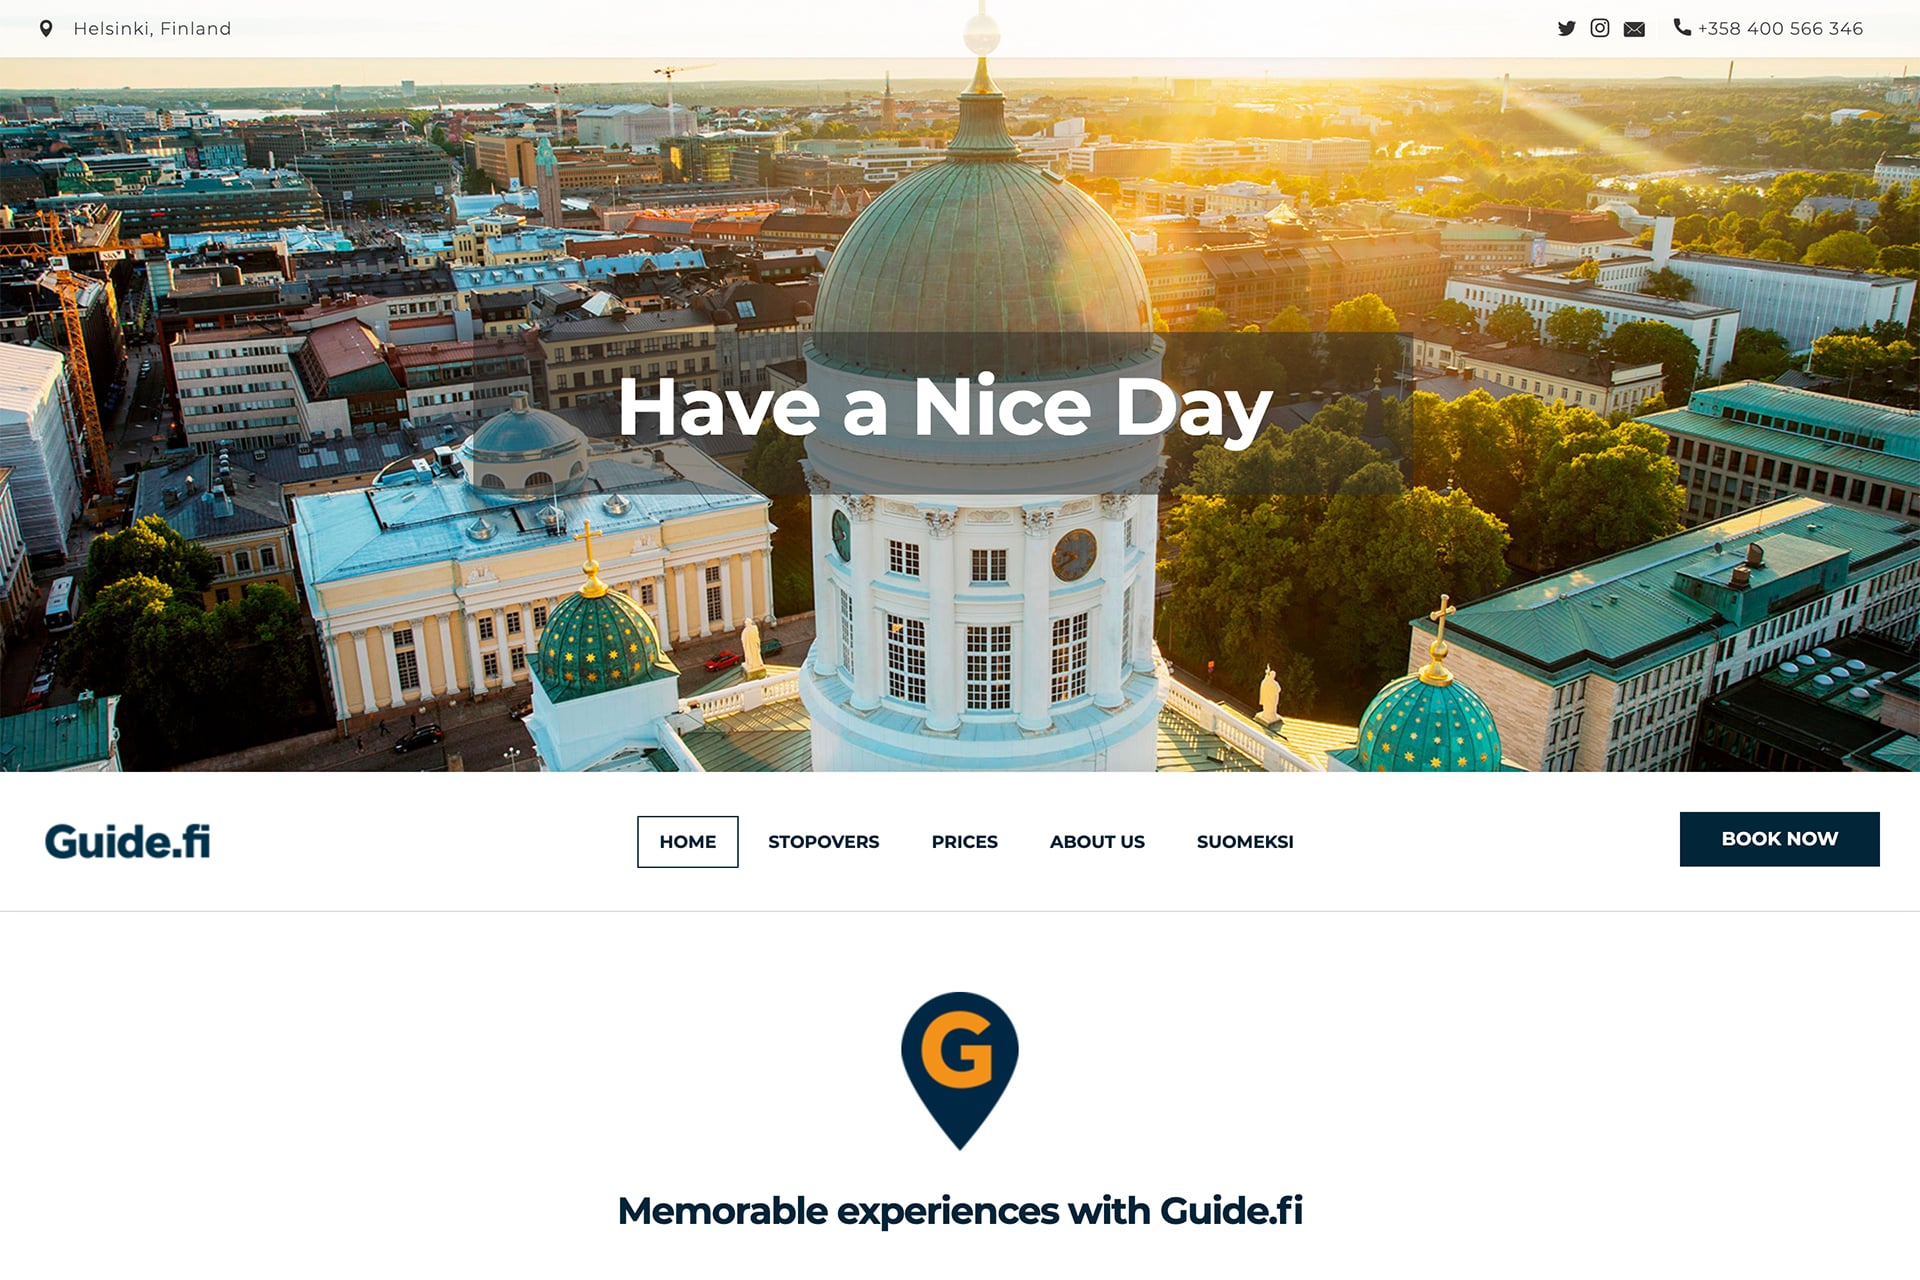 Weebly website example 27 - Guide.fi